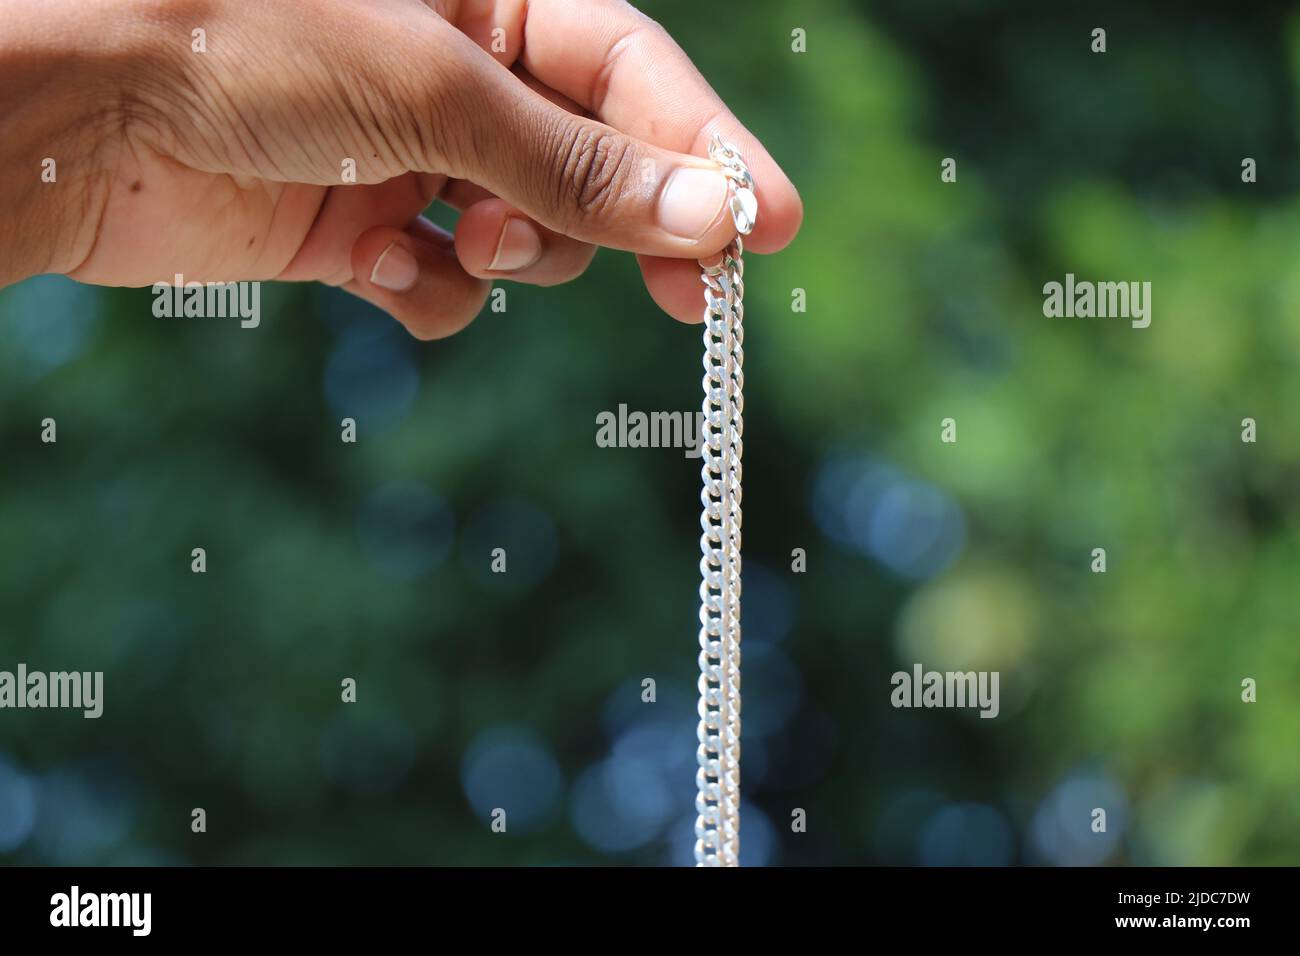 The silver chain held in hand on natural green background Stock Photo